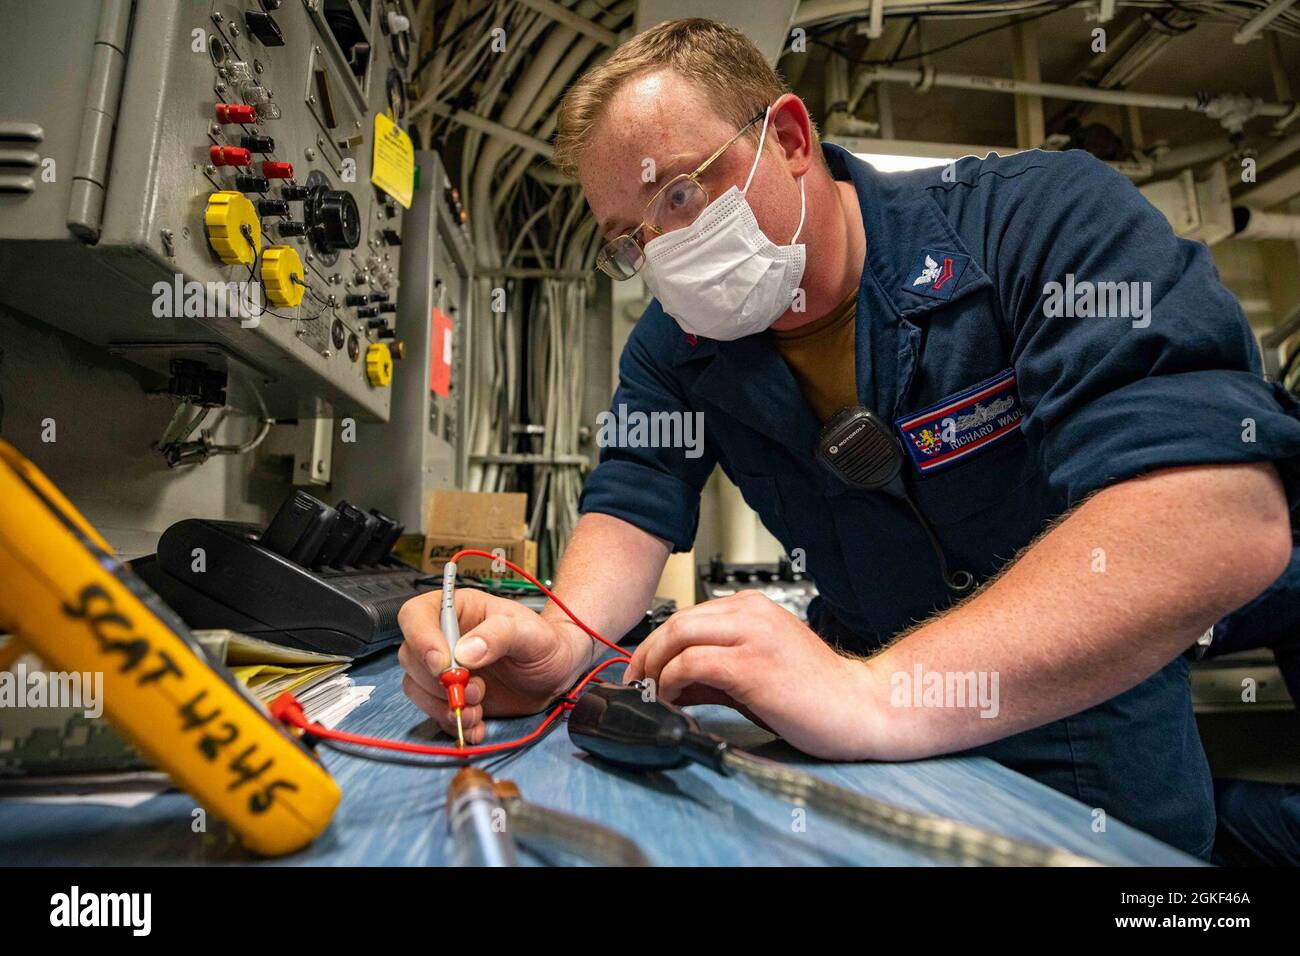 SOUTH CHINA SEA (April 05, 2021) – Electronics Technician 2nd Class, Richard Wade, conducts preventative maintenance on Arleigh-Burke-class guided-missile destroyer USS Barry (DDG 52) during routine underway operations. Barry is assigned to Task Force 71/Destroyer Squadron FIFTEEN (DESRON 15), the Navy’s largest forward deployed DESRON and the U.S. 7th Fleet’s principal surface force. Stock Photo